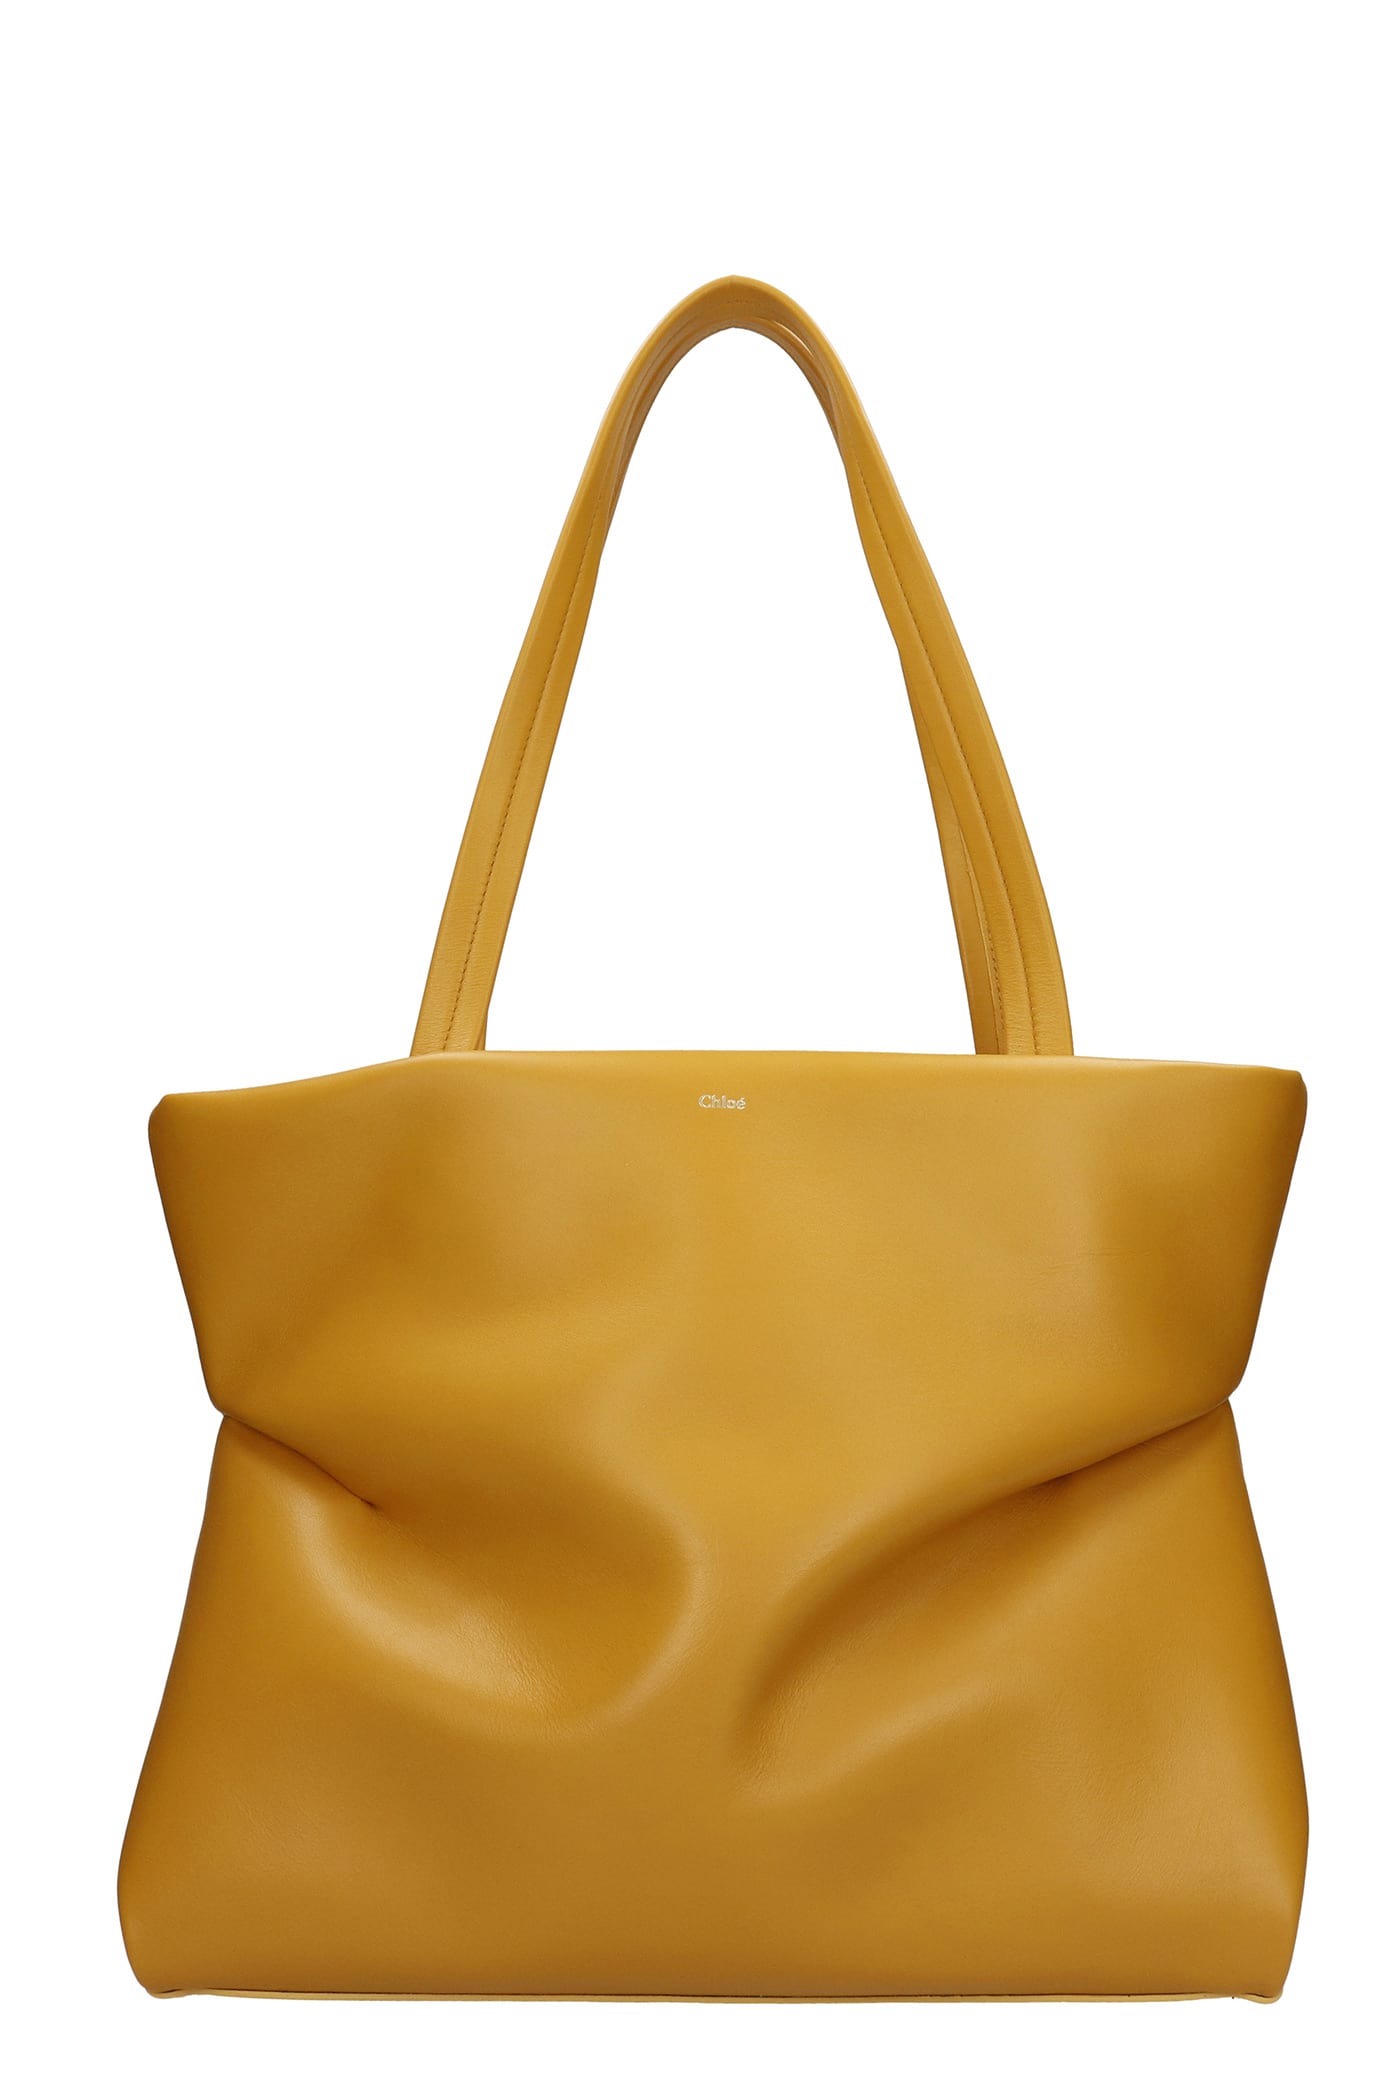 Chloé Judy Tote In Yellow Leather